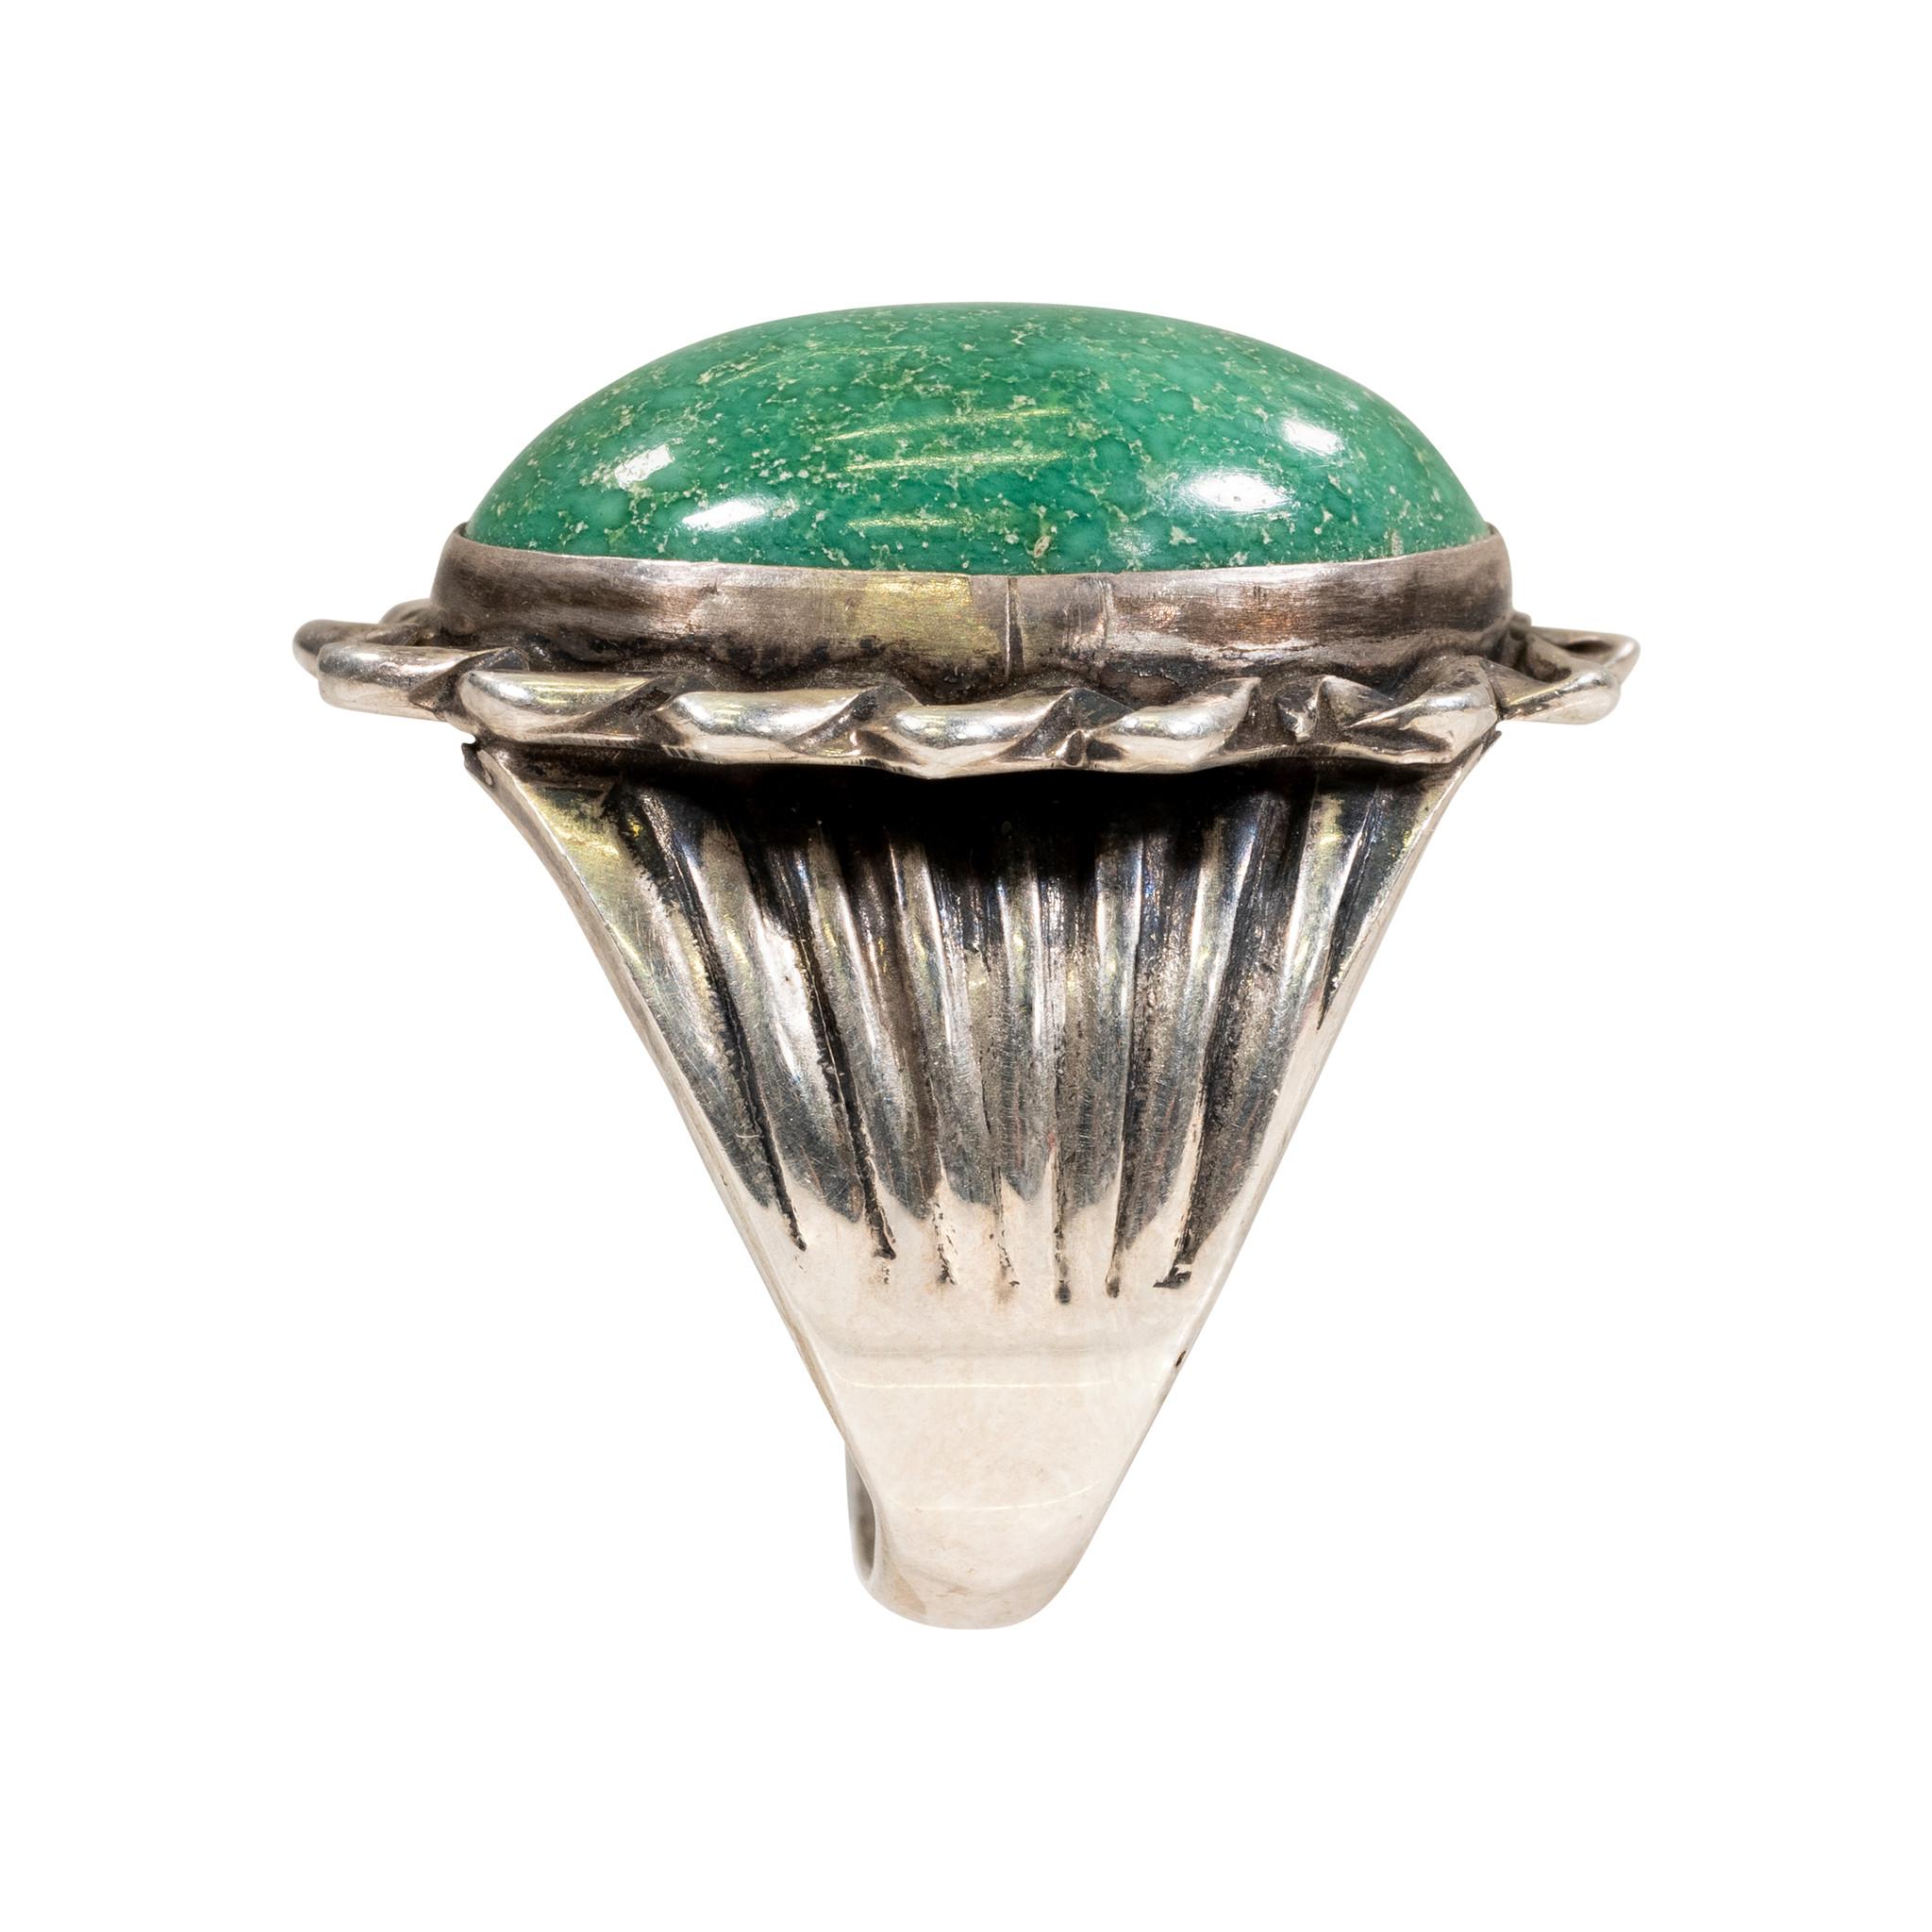 Beautiful greenish Cerrillos Mine turquoise ring on sterling silver with detail surrounding center stone and engraved swipes on sides of band.

PERIOD: After 1950
ORIGIN: New Mexico
SIZE: Size 11 Stone 3/4